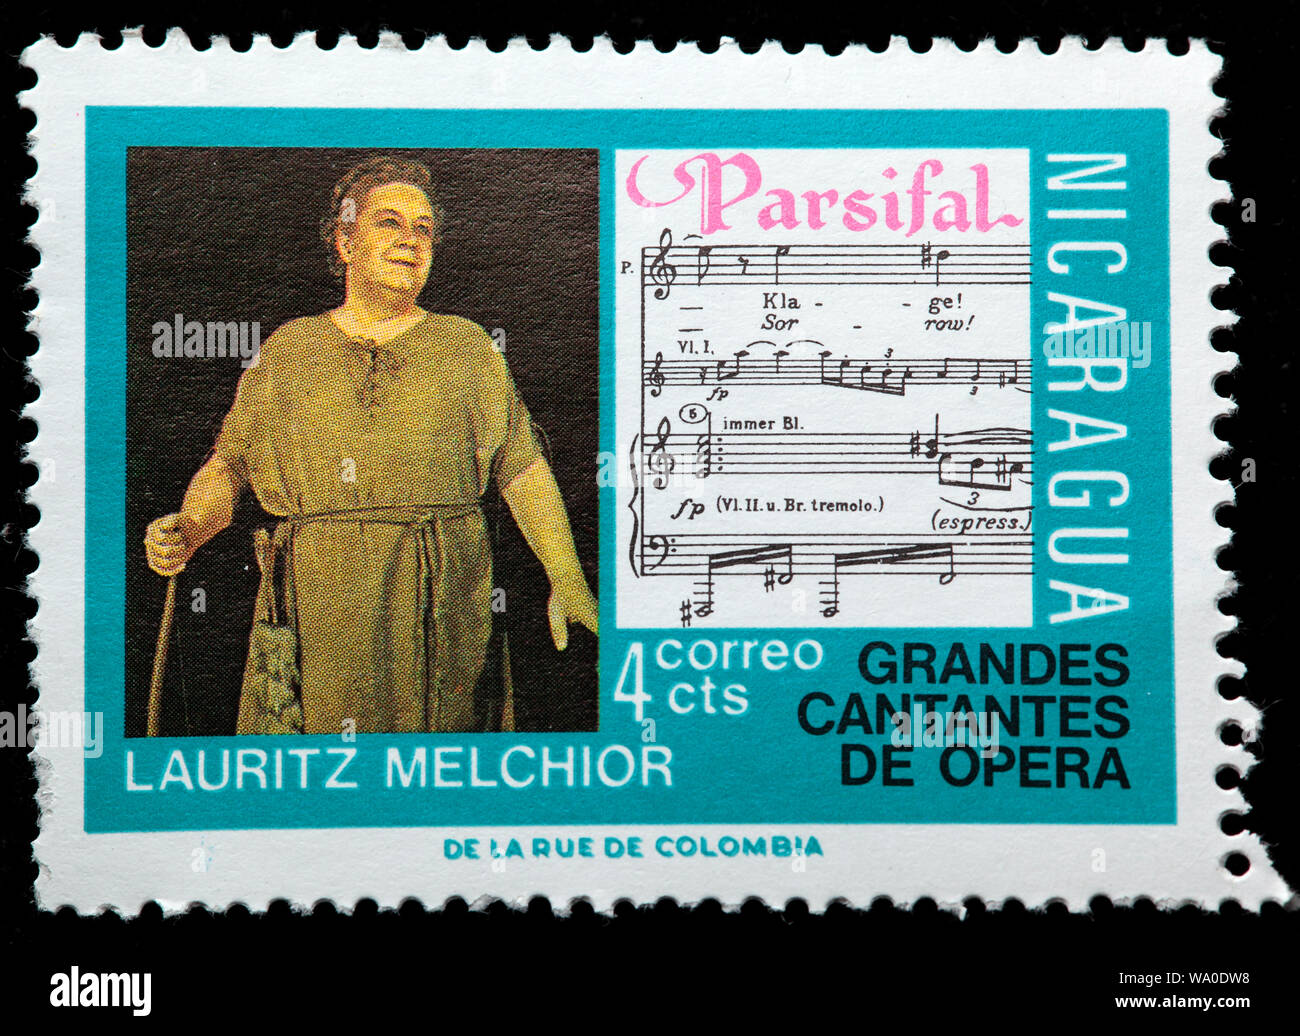 Lauritz Melchior, Parsifal, postage stamp, Nicaragua, 1975 Stock Photo